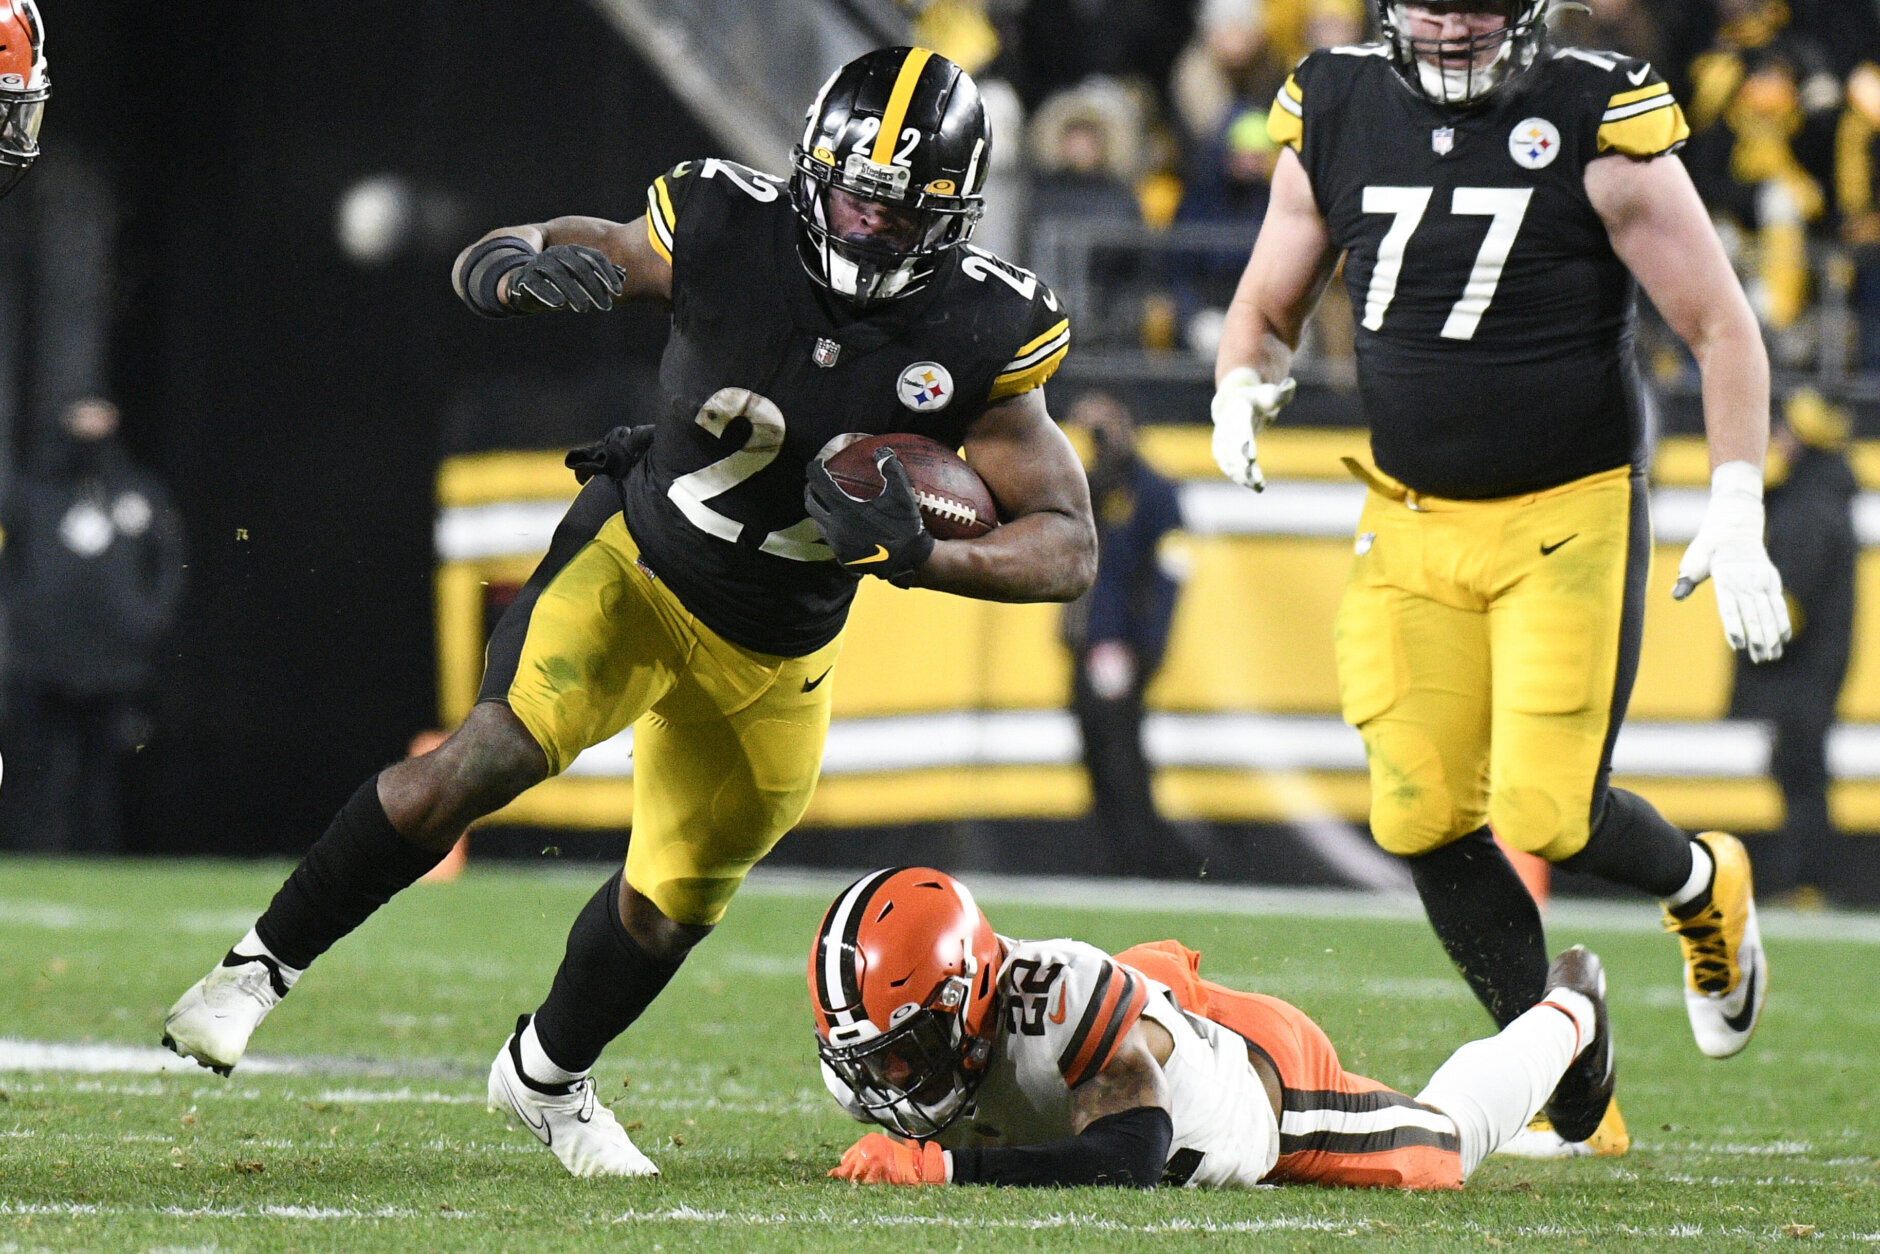 <p><em><strong>Browns 14</strong></em><br />
<em><strong>Steelers 26</strong></em></p>
<p>In what is believed to be Ben Roethlisberger&#8217;s final game in Pittsburgh, the game itself was about everybody but him &#8212; <a href="https://profootballtalk.nbcsports.com/2022/01/03/najee-harris-passes-franco-harris-for-franchise-rookie-rushing-record/" target="_blank" rel="noopener">Najee Harris broke a generations-old record</a>, T.J. Watt&#8217;s four-sack effort has him on the brink of the single-season sack record and Mike Tomlin is the first coach in NFL history to have 15 consecutive non-losing seasons. And, oh by the way, the Steelers are still alive in the playoff hunt. Give Big Ben his props for going 26-3-1 against the Browns in his illustrious career but his performance Monday night was the most forgettable part of what was a helluva night in the Steel City.</p>
